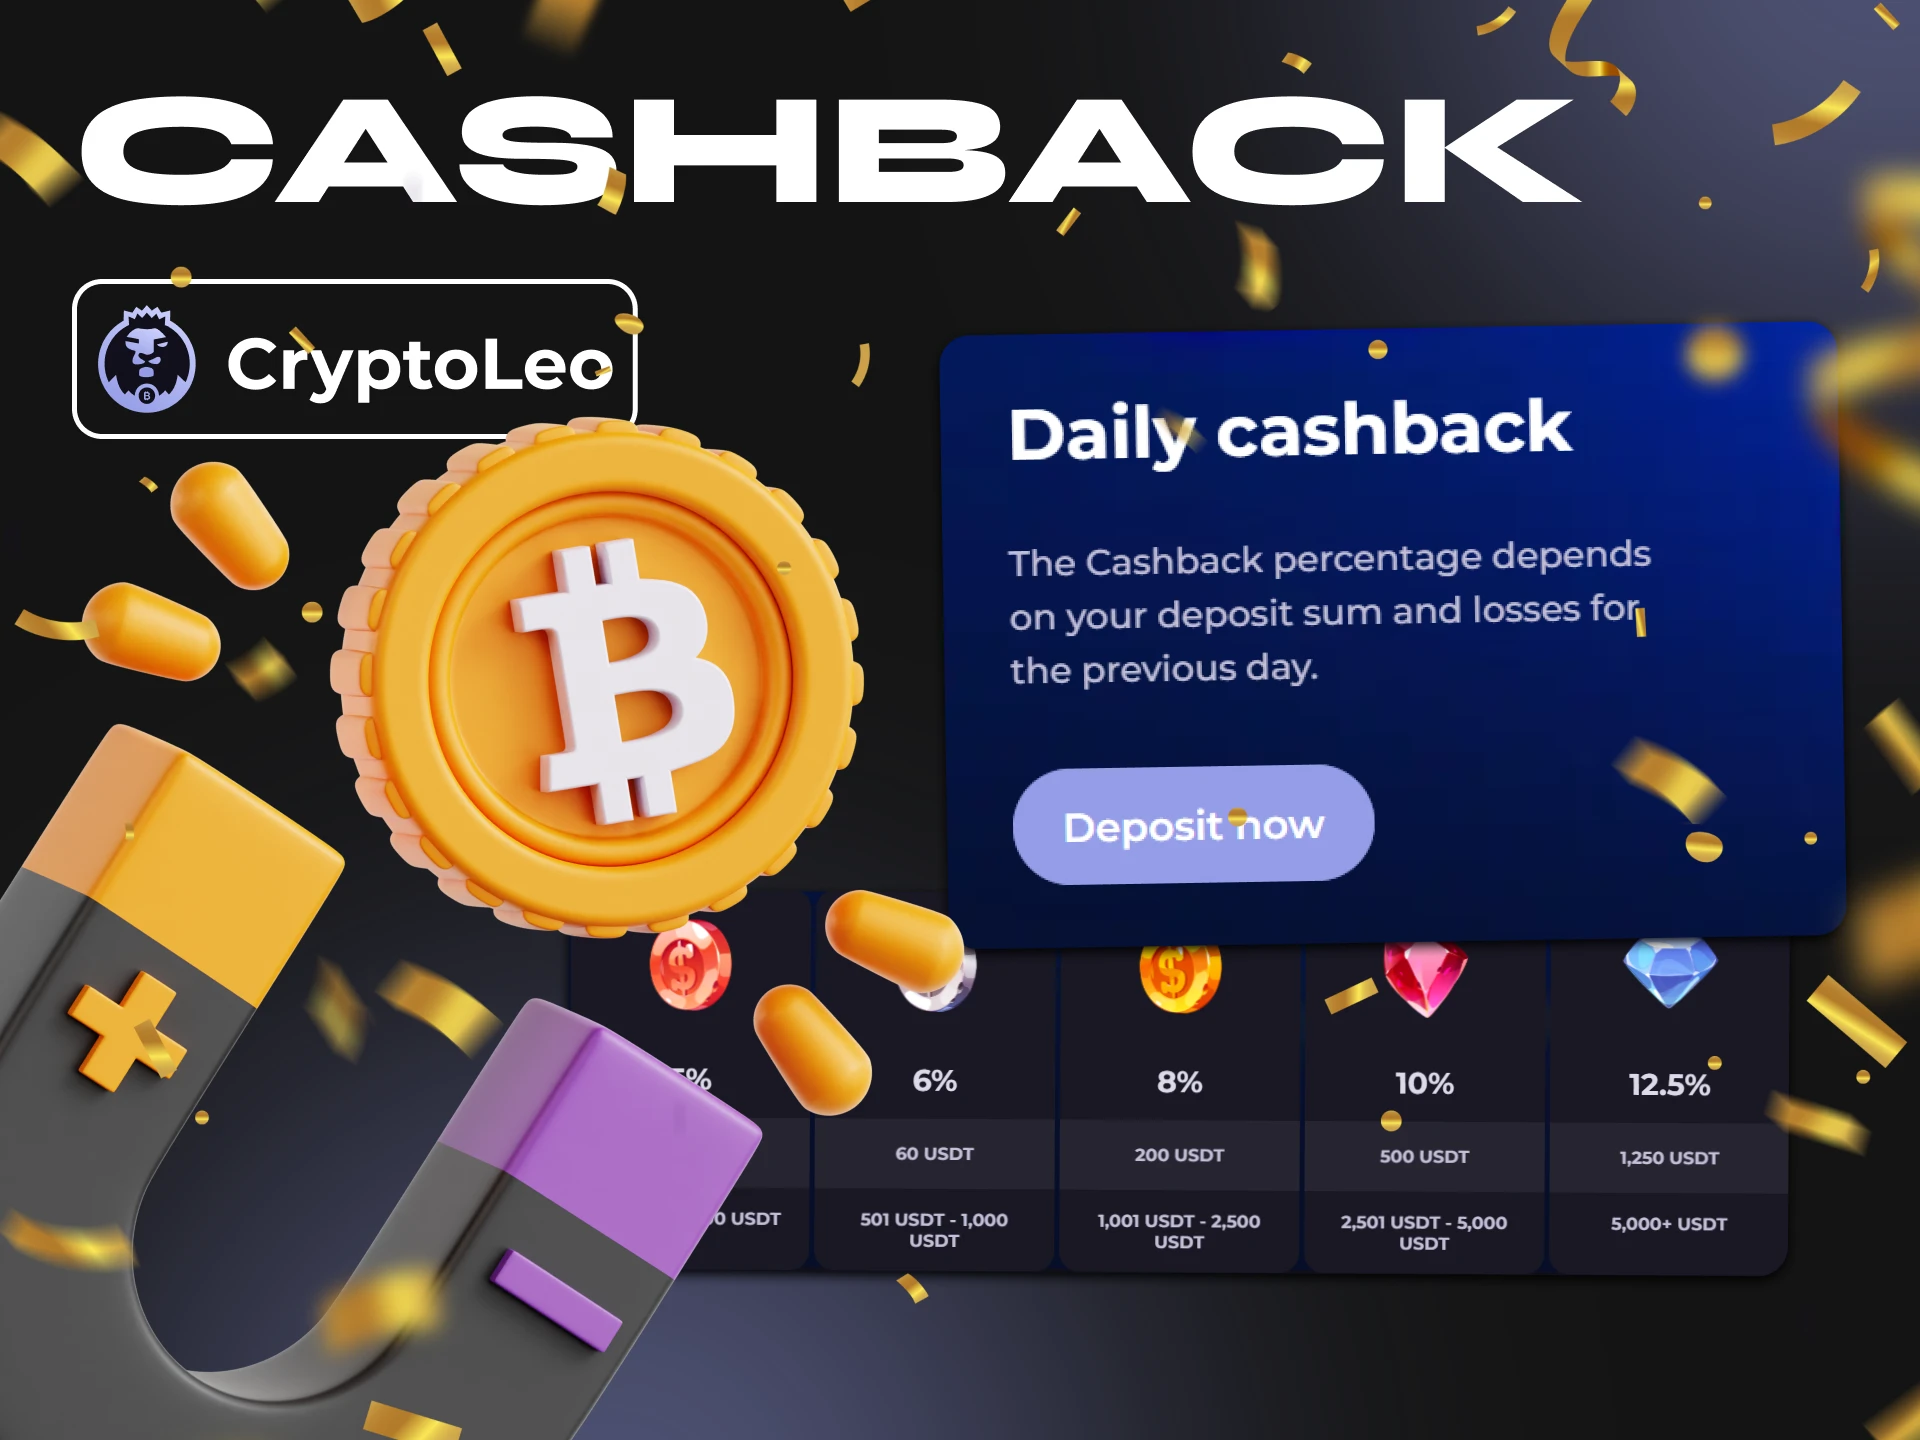 At Cryptoleo you can get cashback for your losses every day.